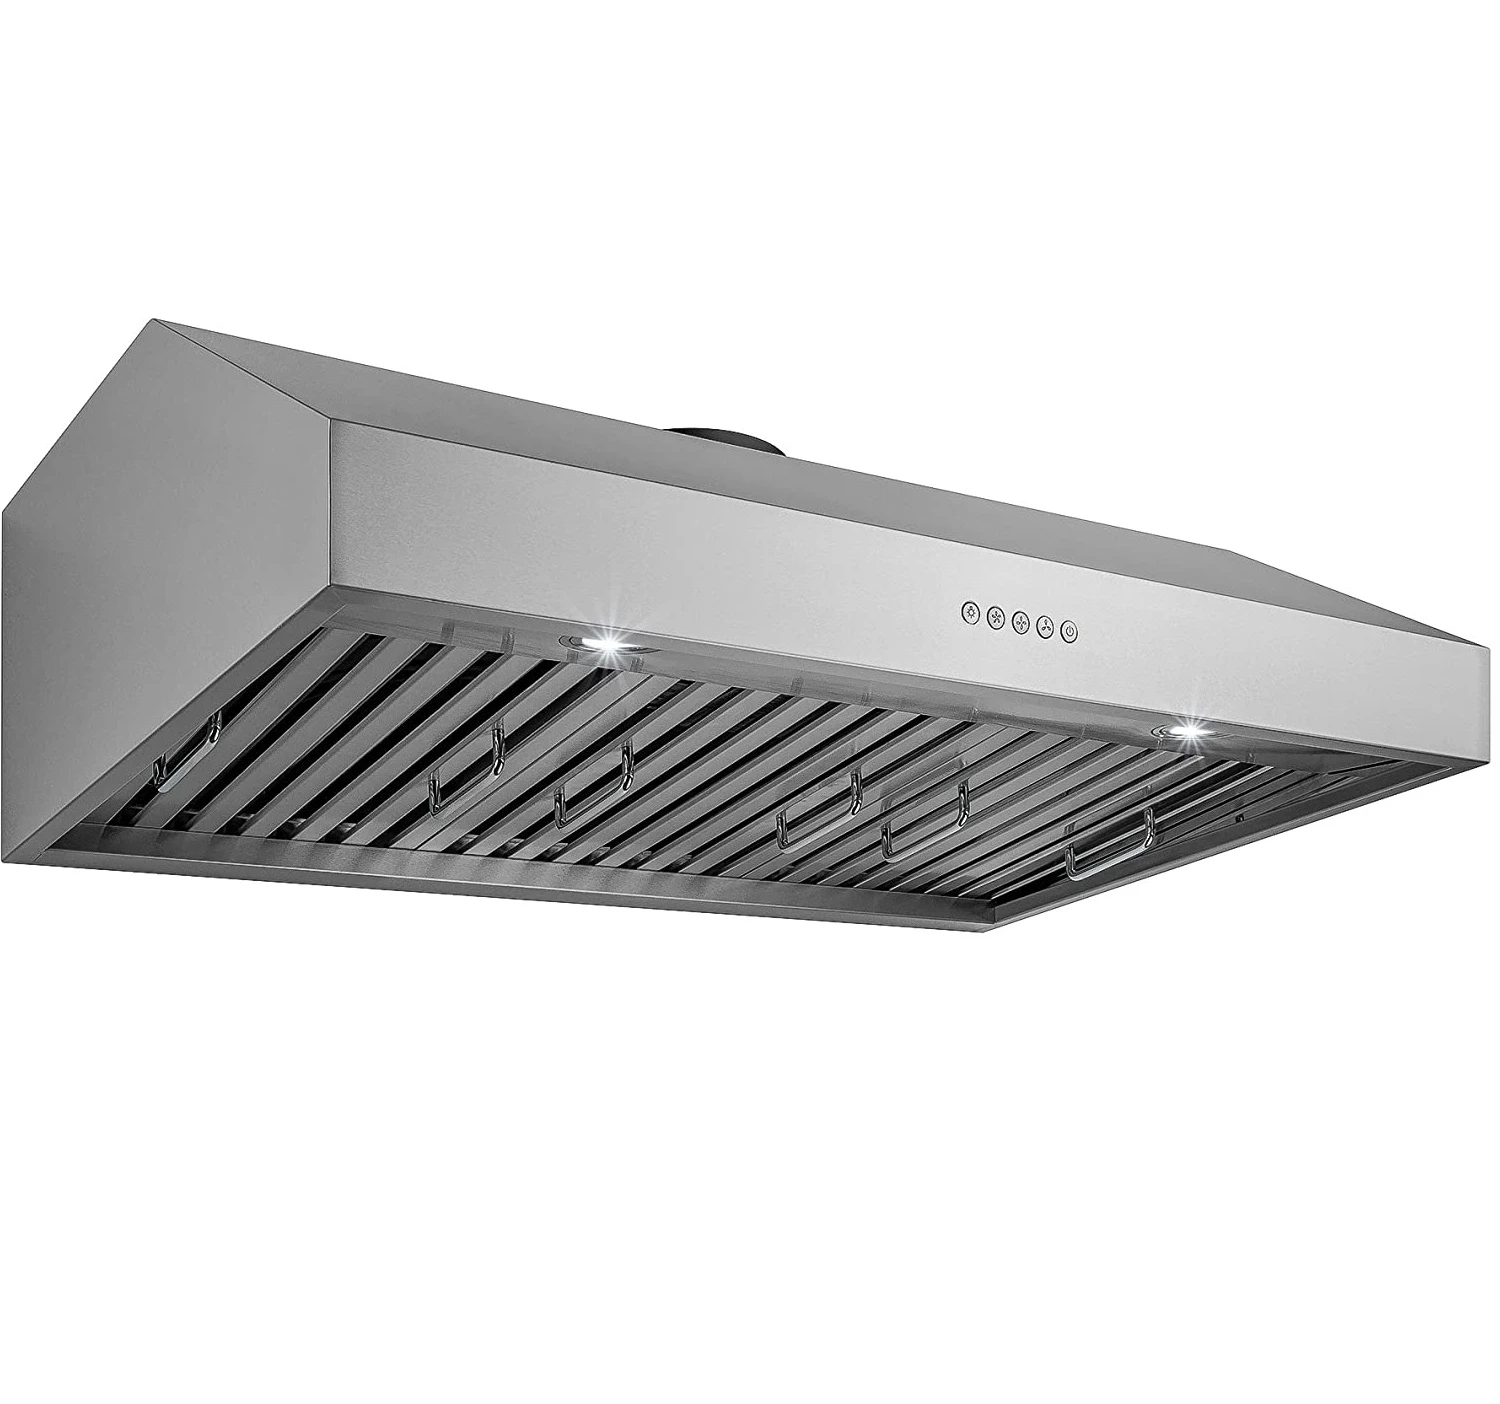 30 in under cabinet range hood in stainless steel with push button switch